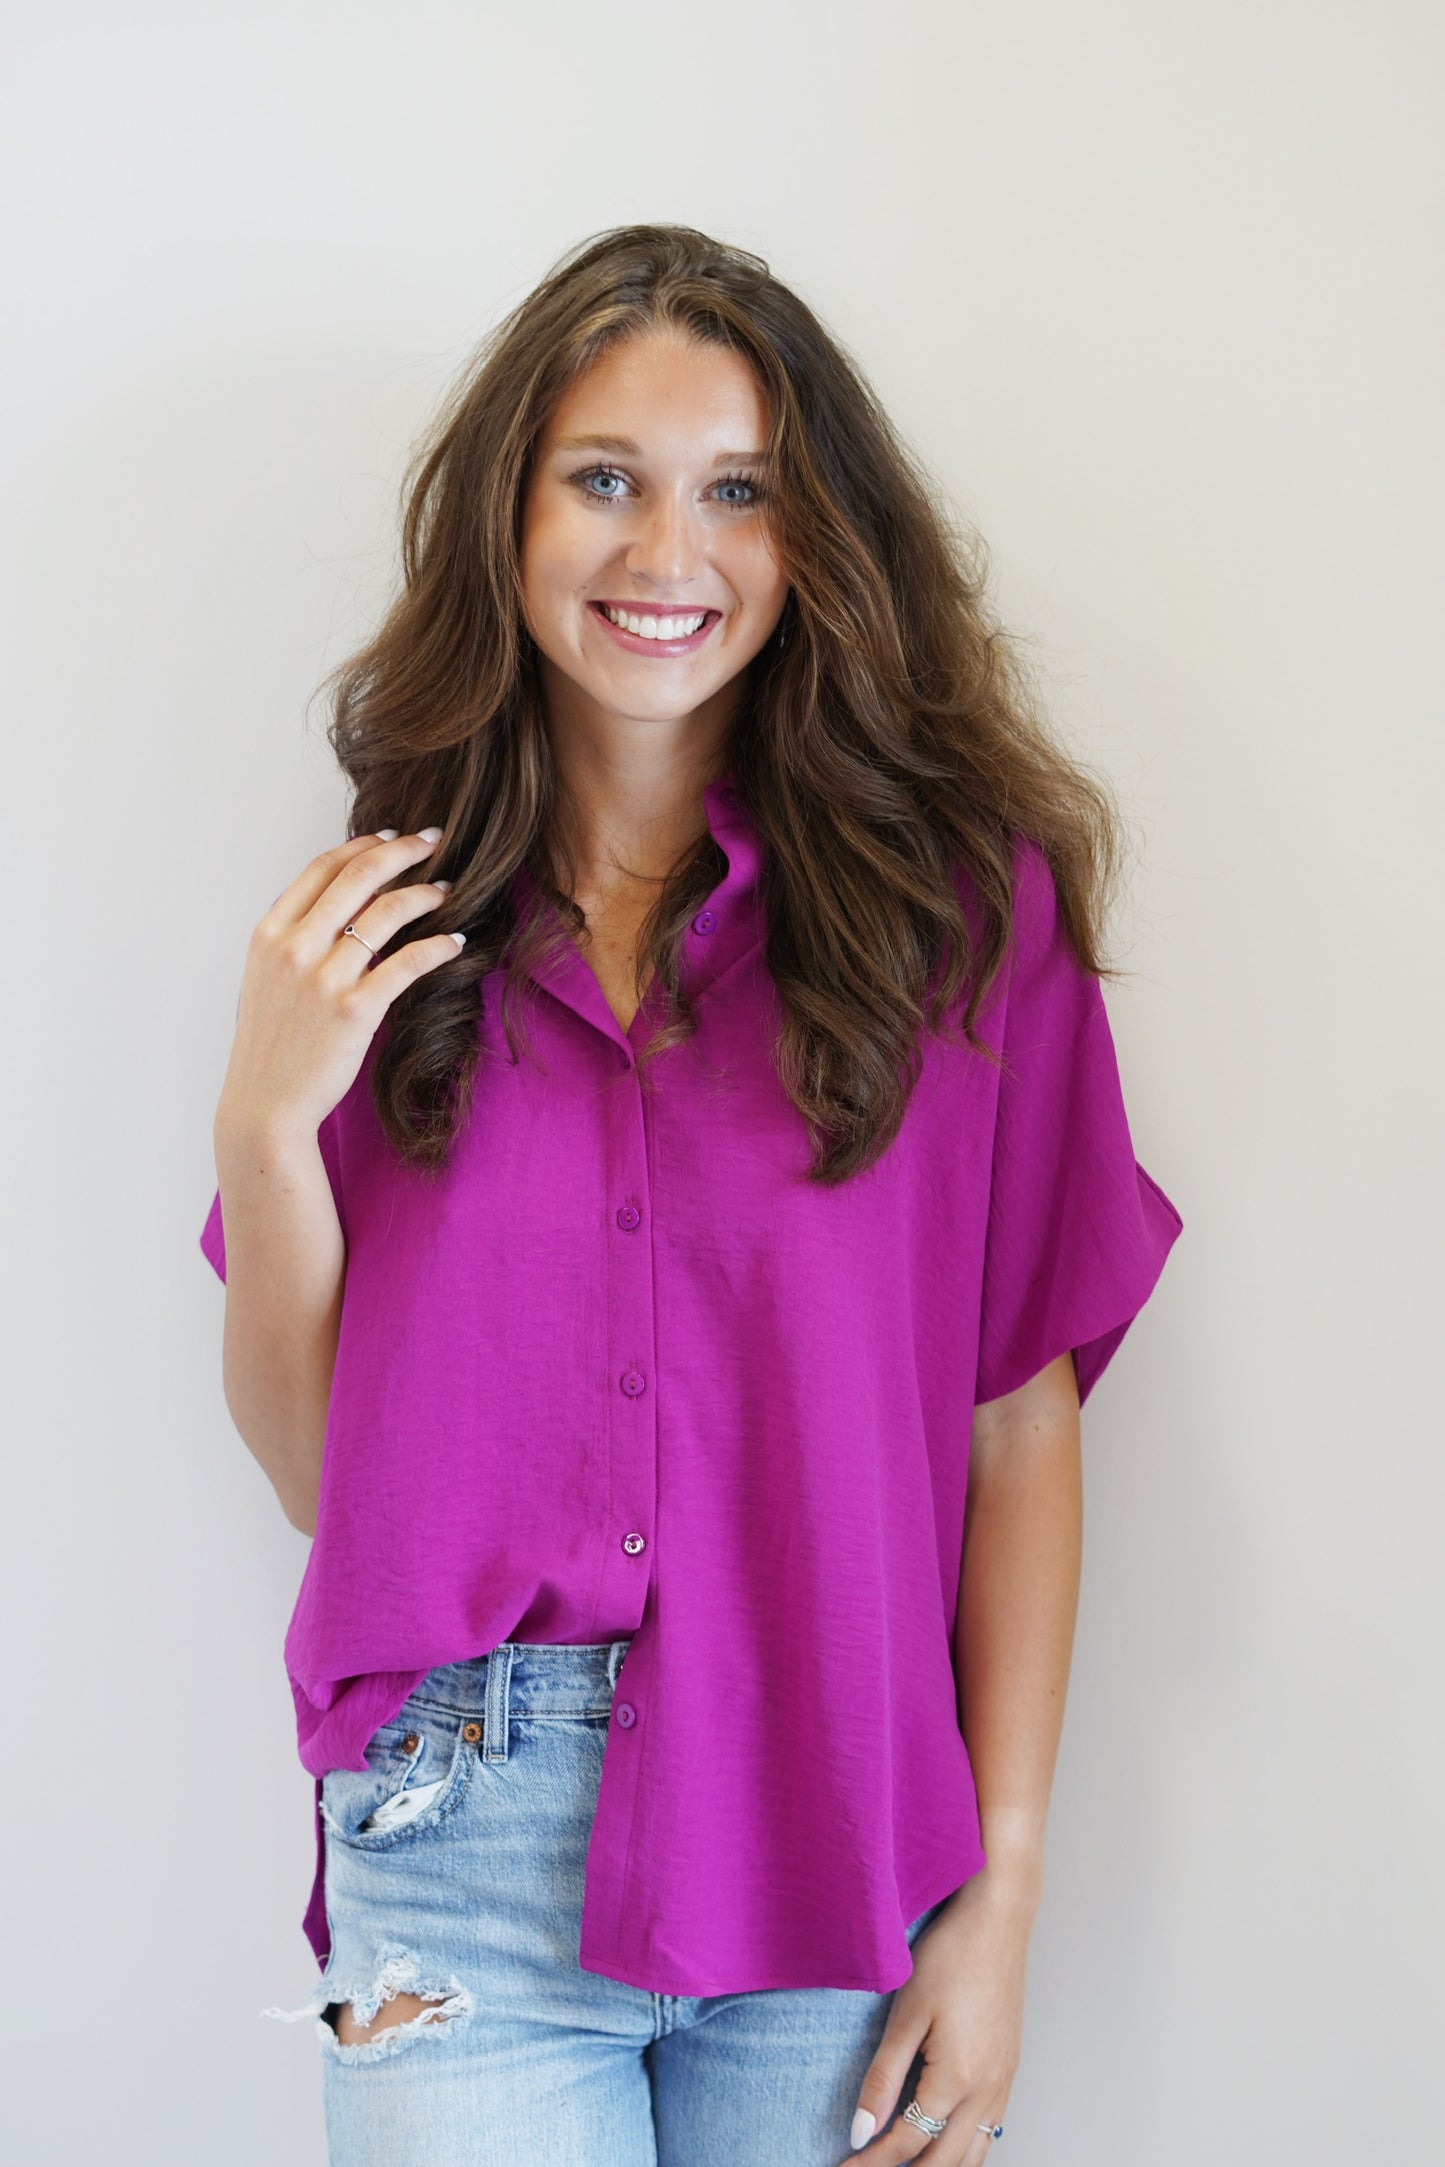 Olivia Button Up Blouse Collared  Button Up Blouse Short Sleeved Color: Magenta  95% Polyester  5% Spandex Hand Wash Cold, Do Not Wring Or Twist, Use Only None Chlorine Bleach, Line Dry, Low Iron If Needed Model is wearing size: Small